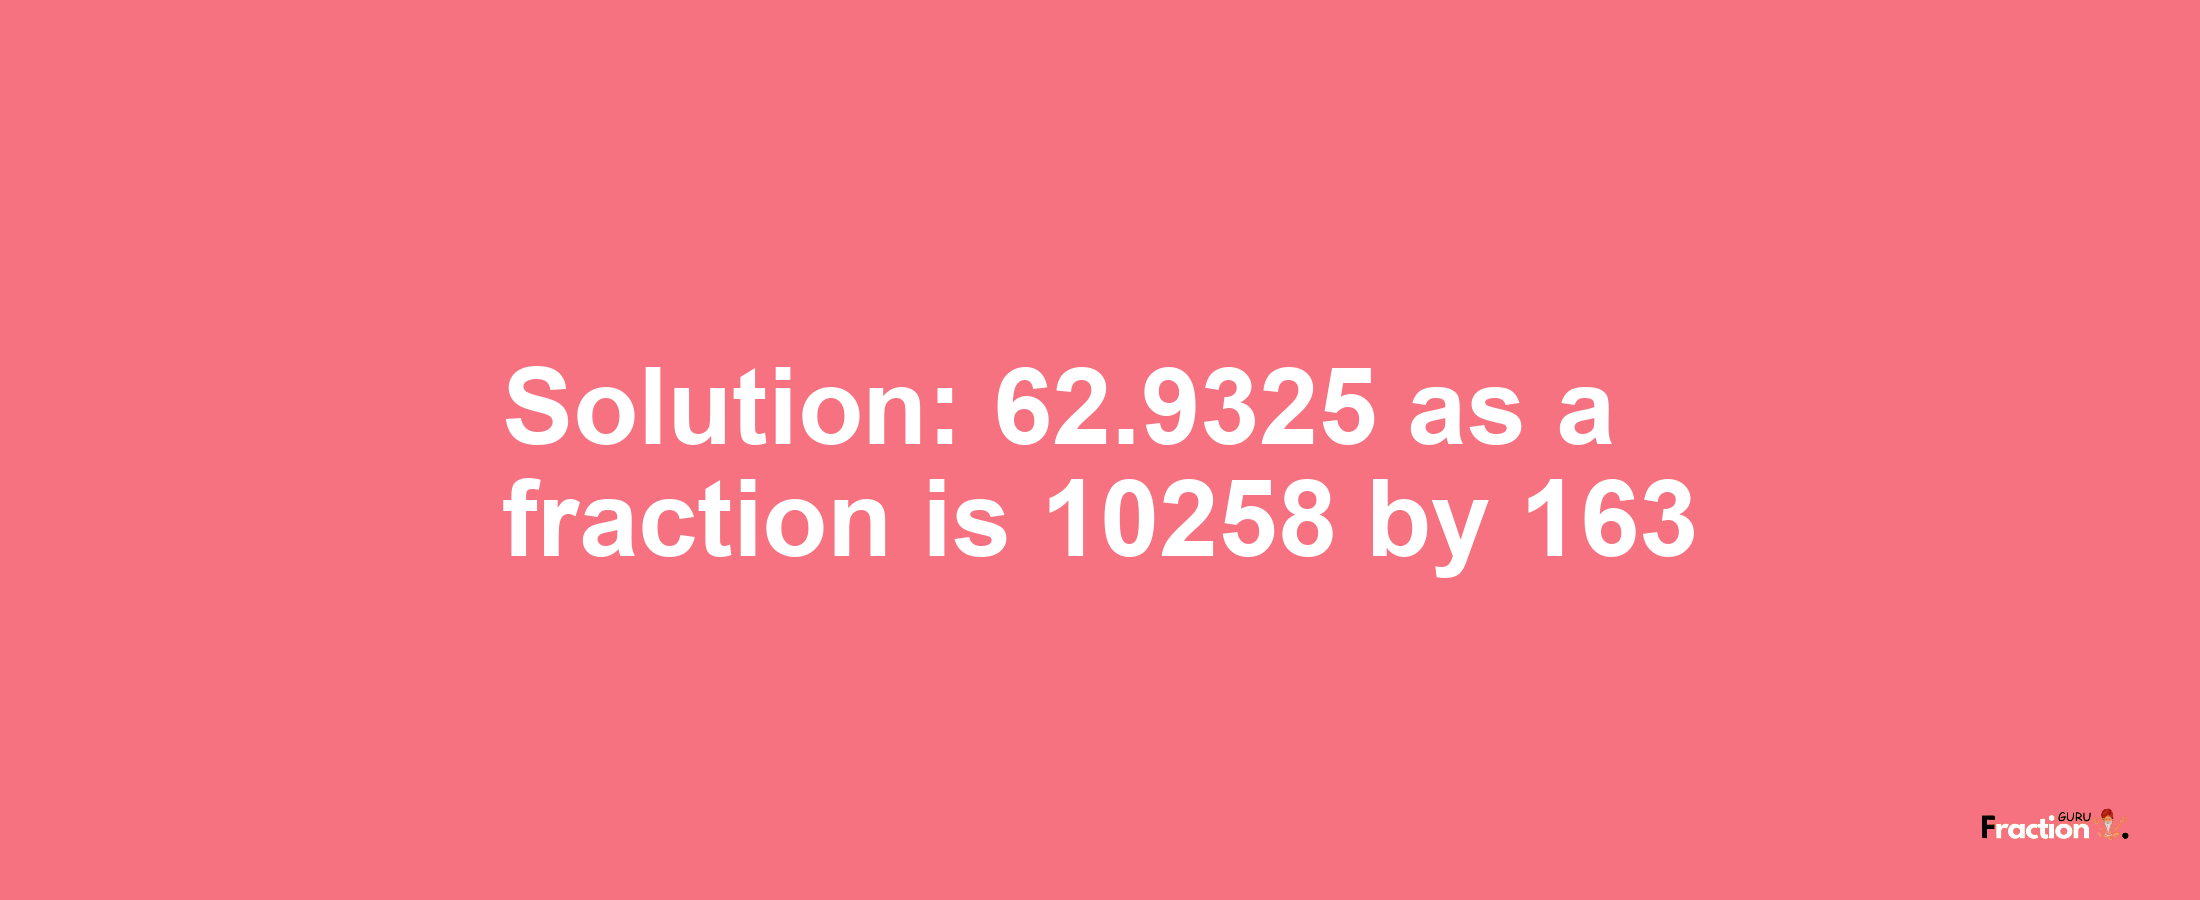 Solution:62.9325 as a fraction is 10258/163